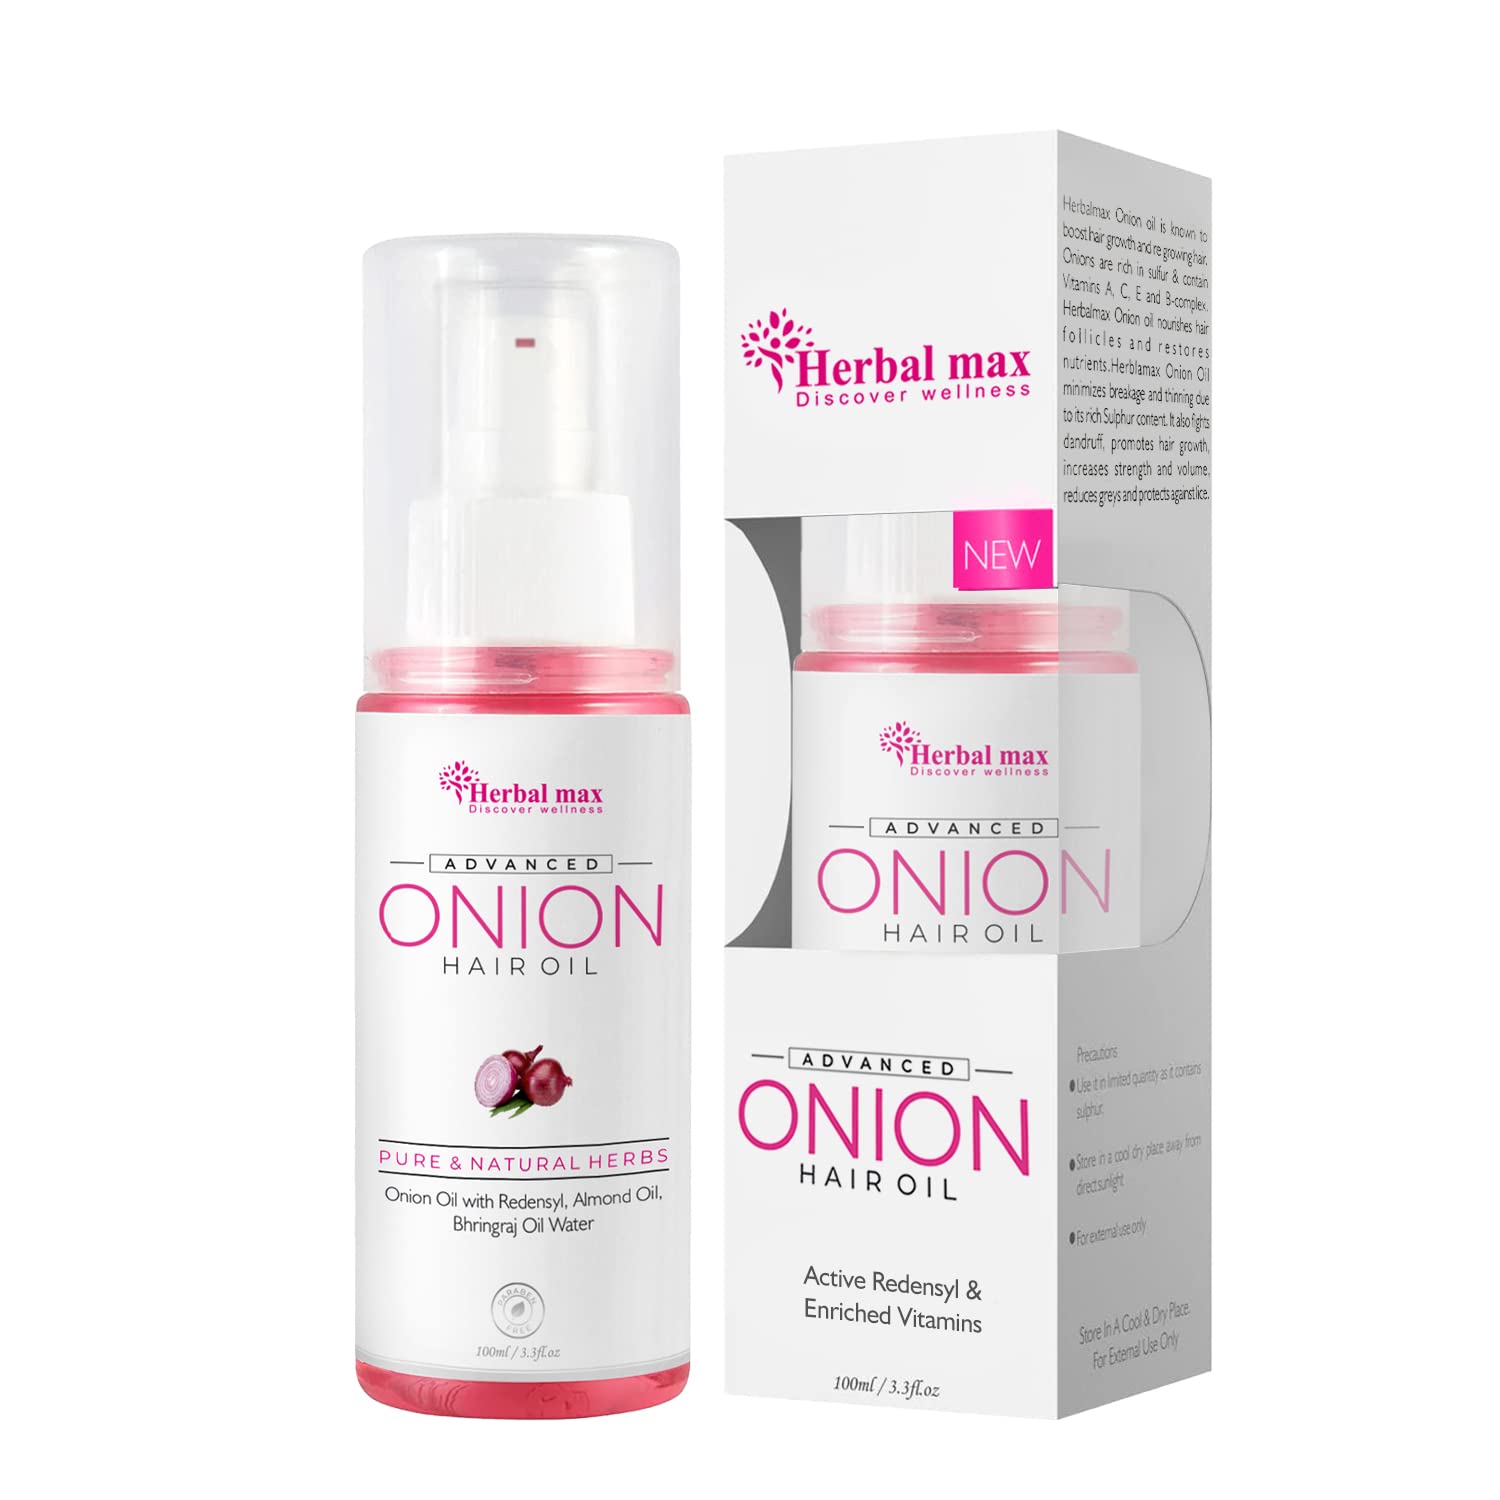 Herbal max Advance Onion Seed Hair Oil for Silky and Strong Hair, Controls Hair Fall, Promotes Growth (100ML)